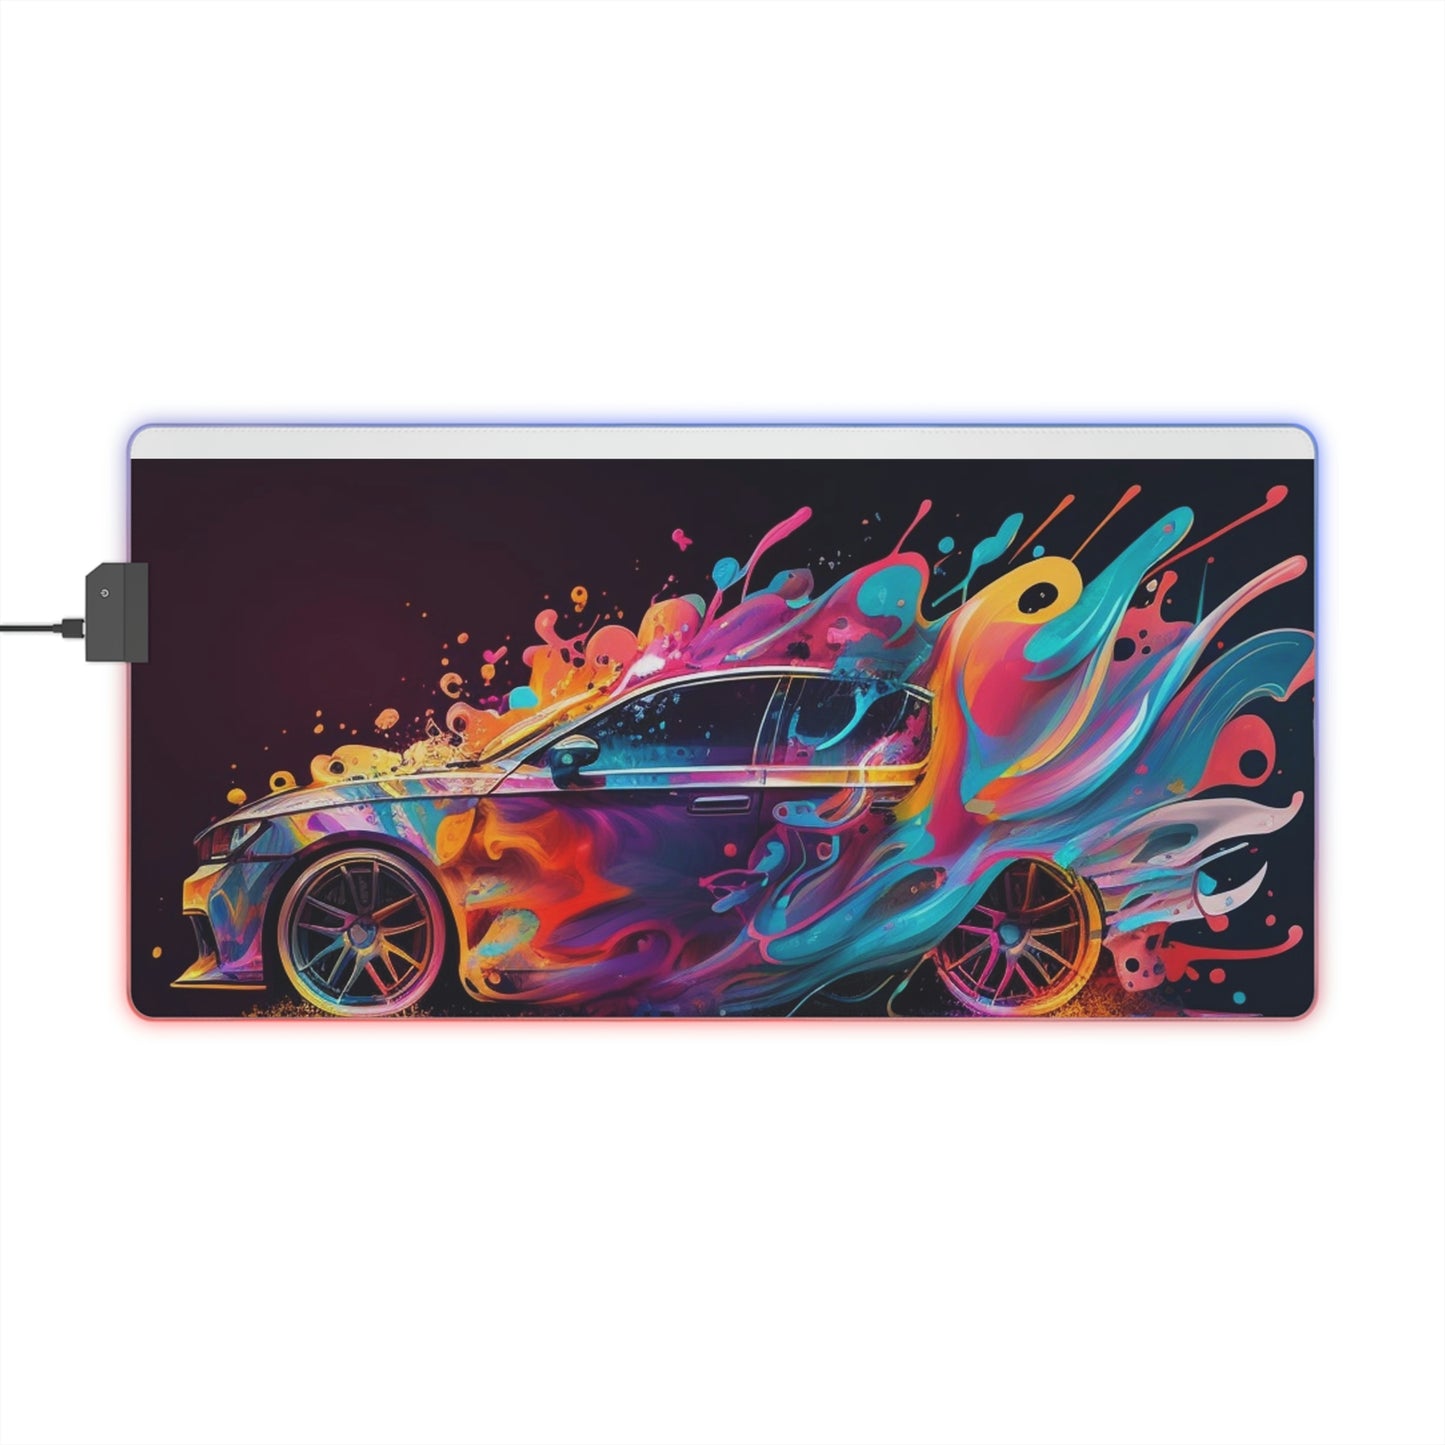 LED Gaming Mouse Pad Hotrod Color 2